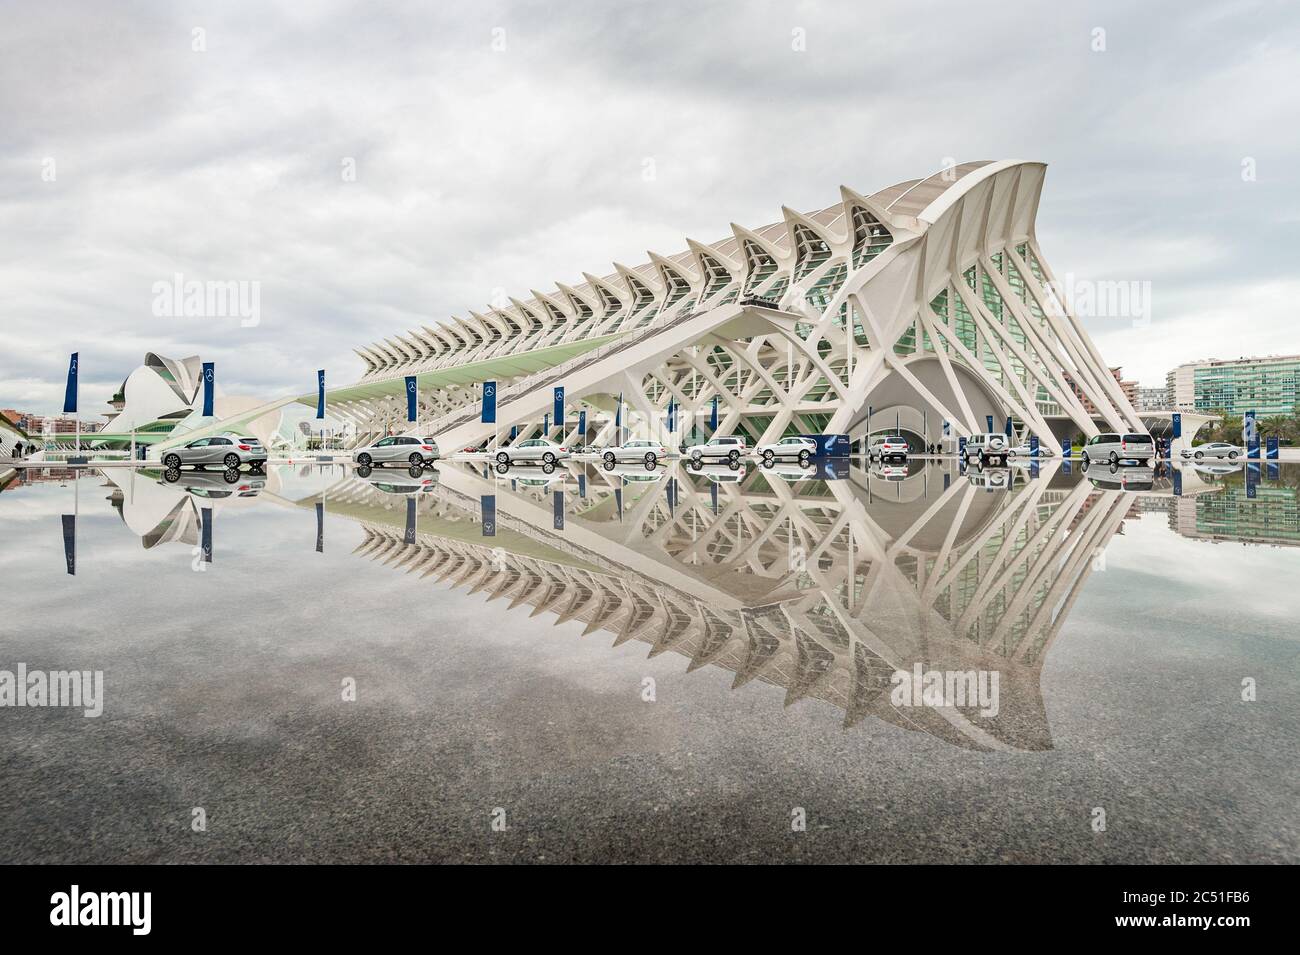 Striking modern architecture as displayed in the design of the buildings of the City Of Arts and Science in Valencia Spain Stock Photo